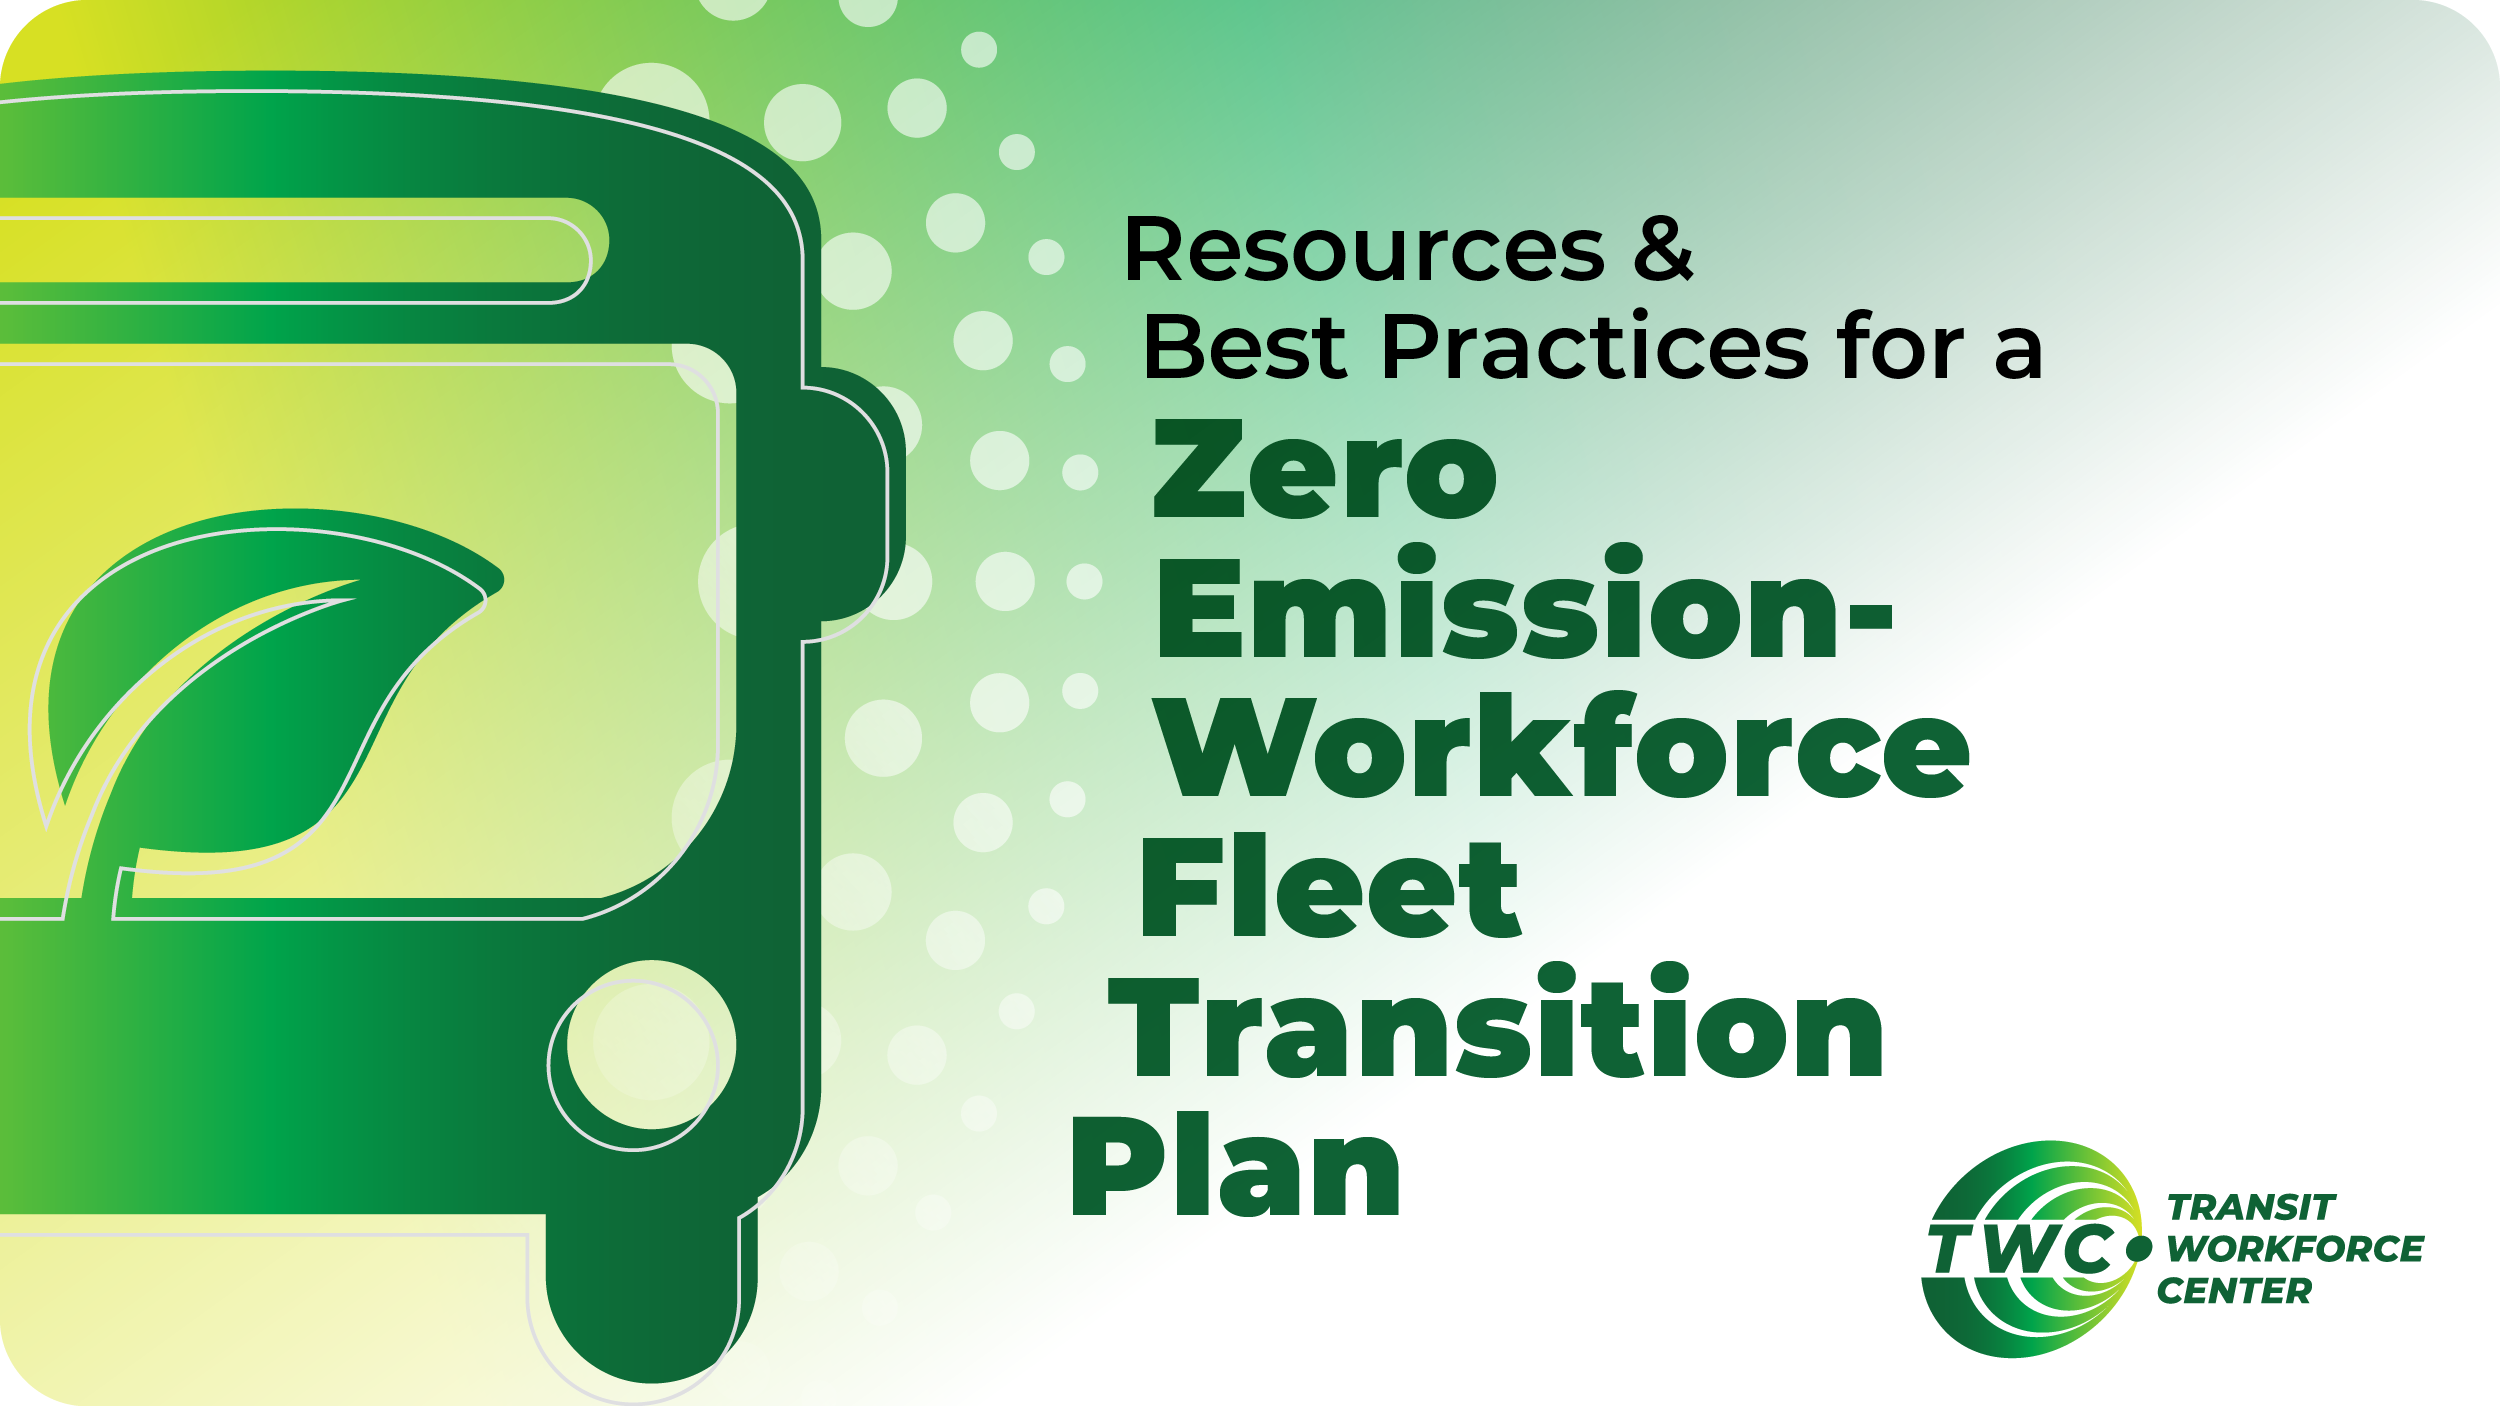 Press Release: Resources and Best Practices for Workforce Transition to Zero Emission Buses Released by Transit Workforce Center